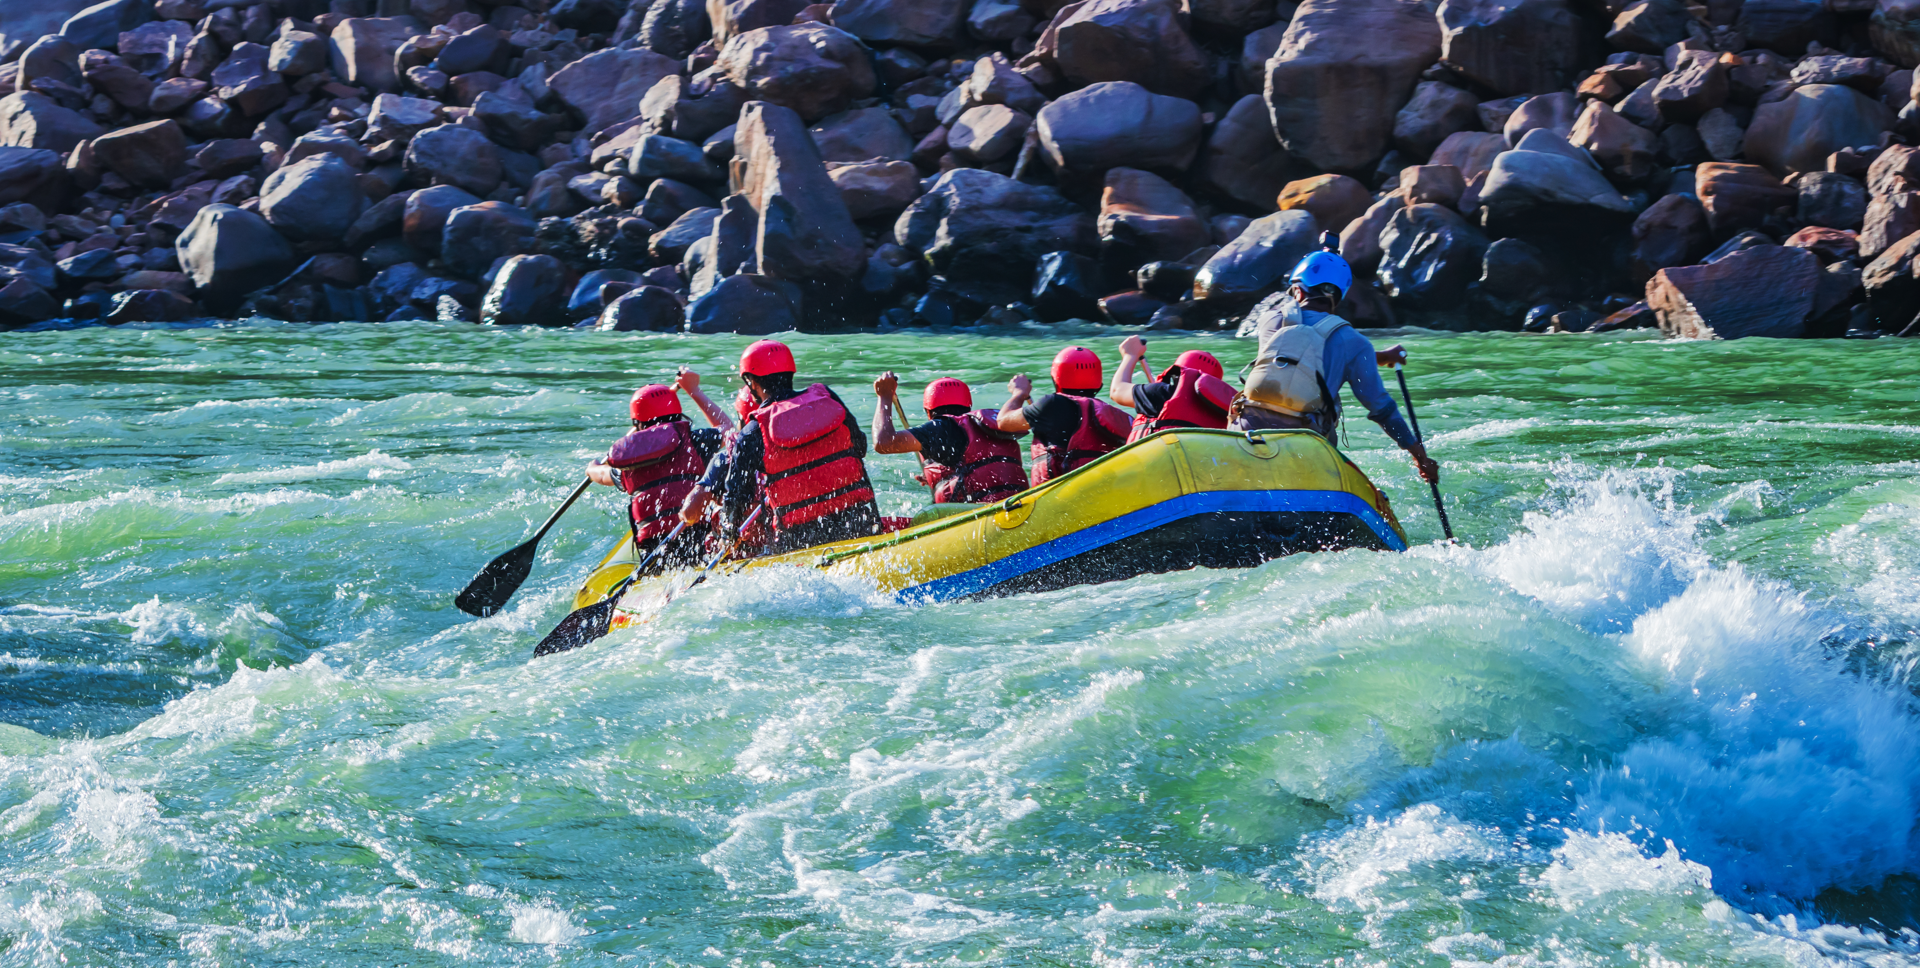 What Are The Best Shoes For White Water Rafting?